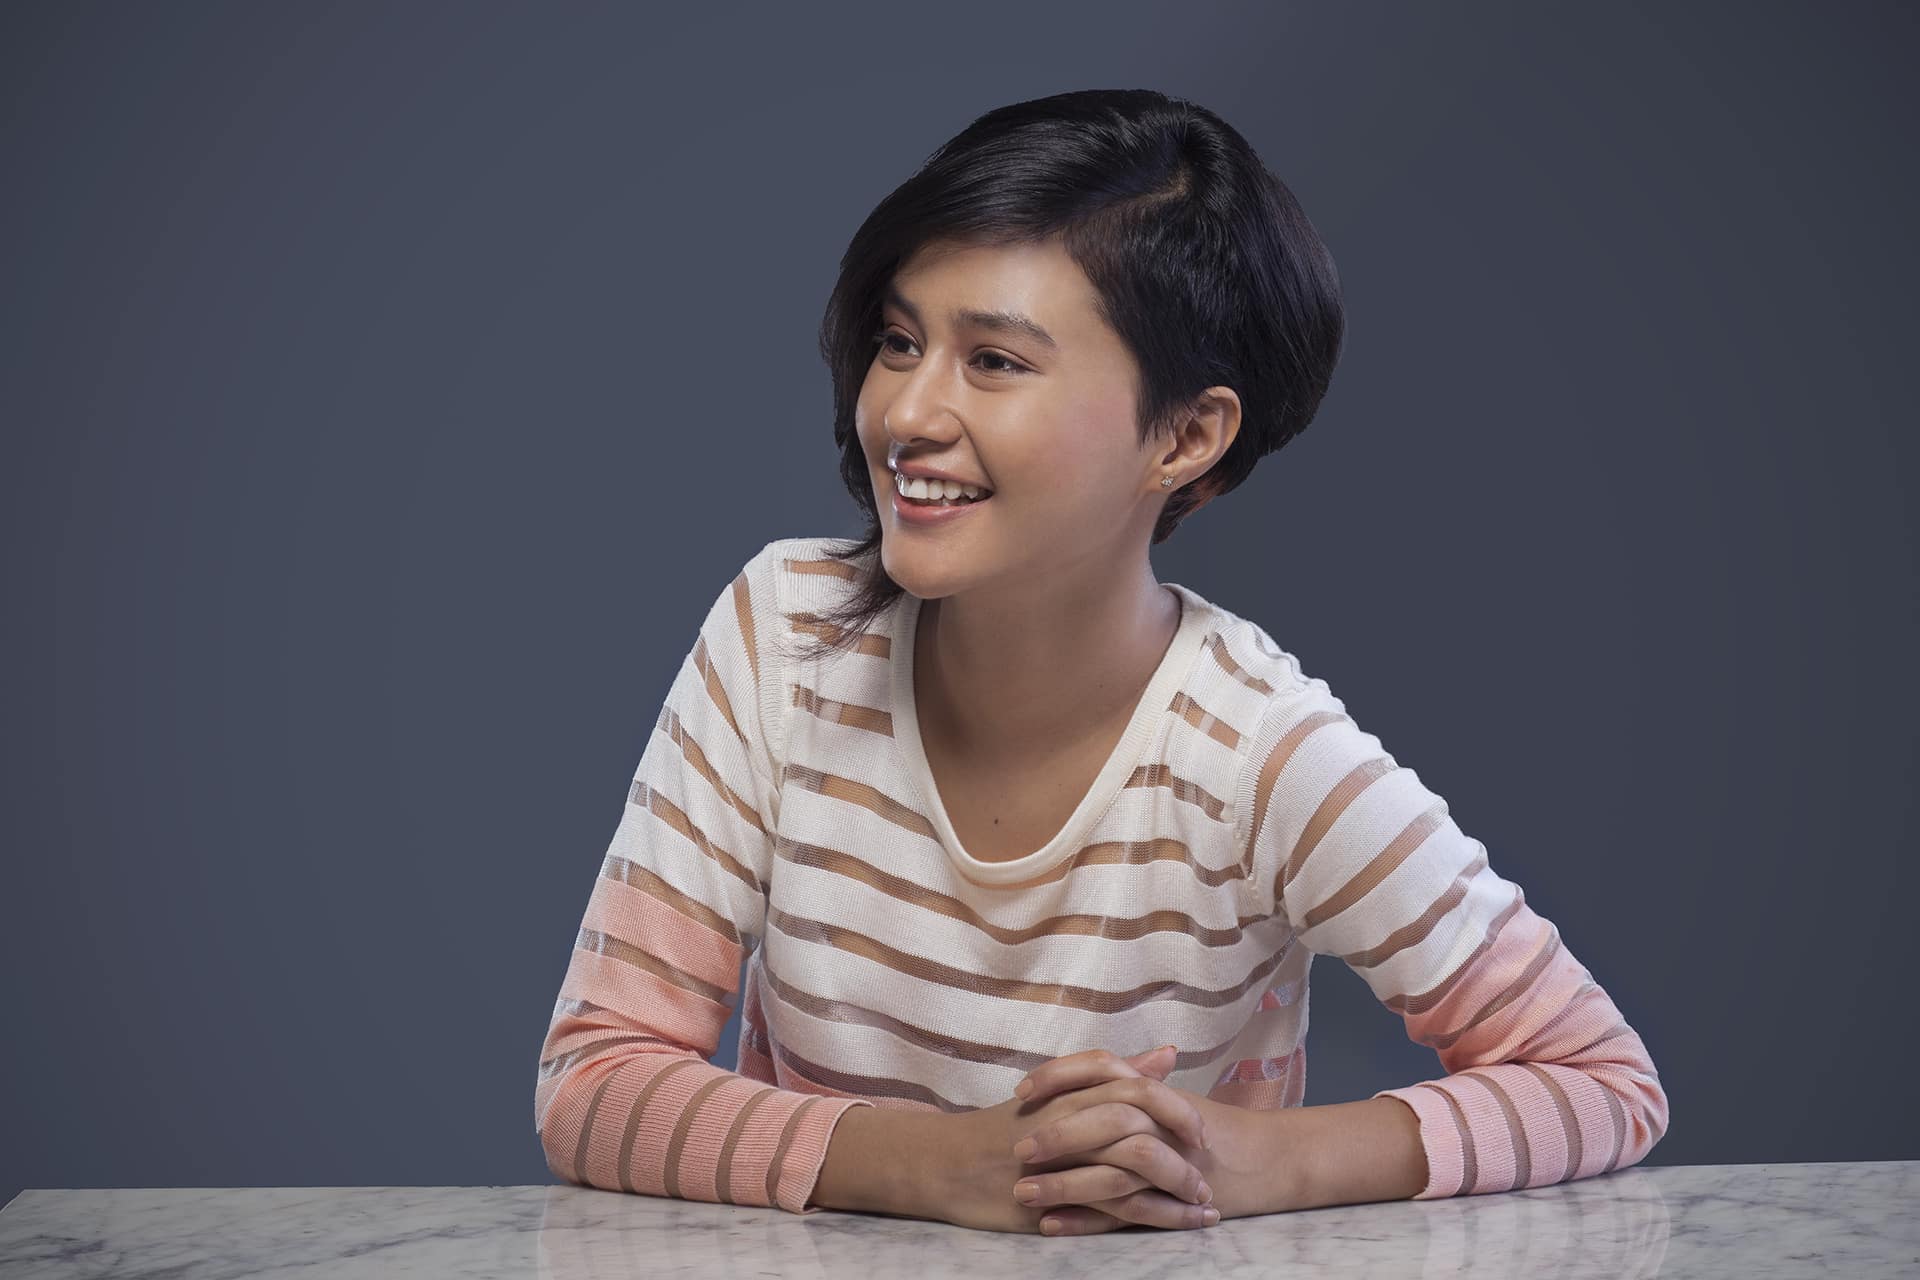 All You Need To Know About Airtel 4G Ad Girl, Sasha Chettri - Marketing Mind